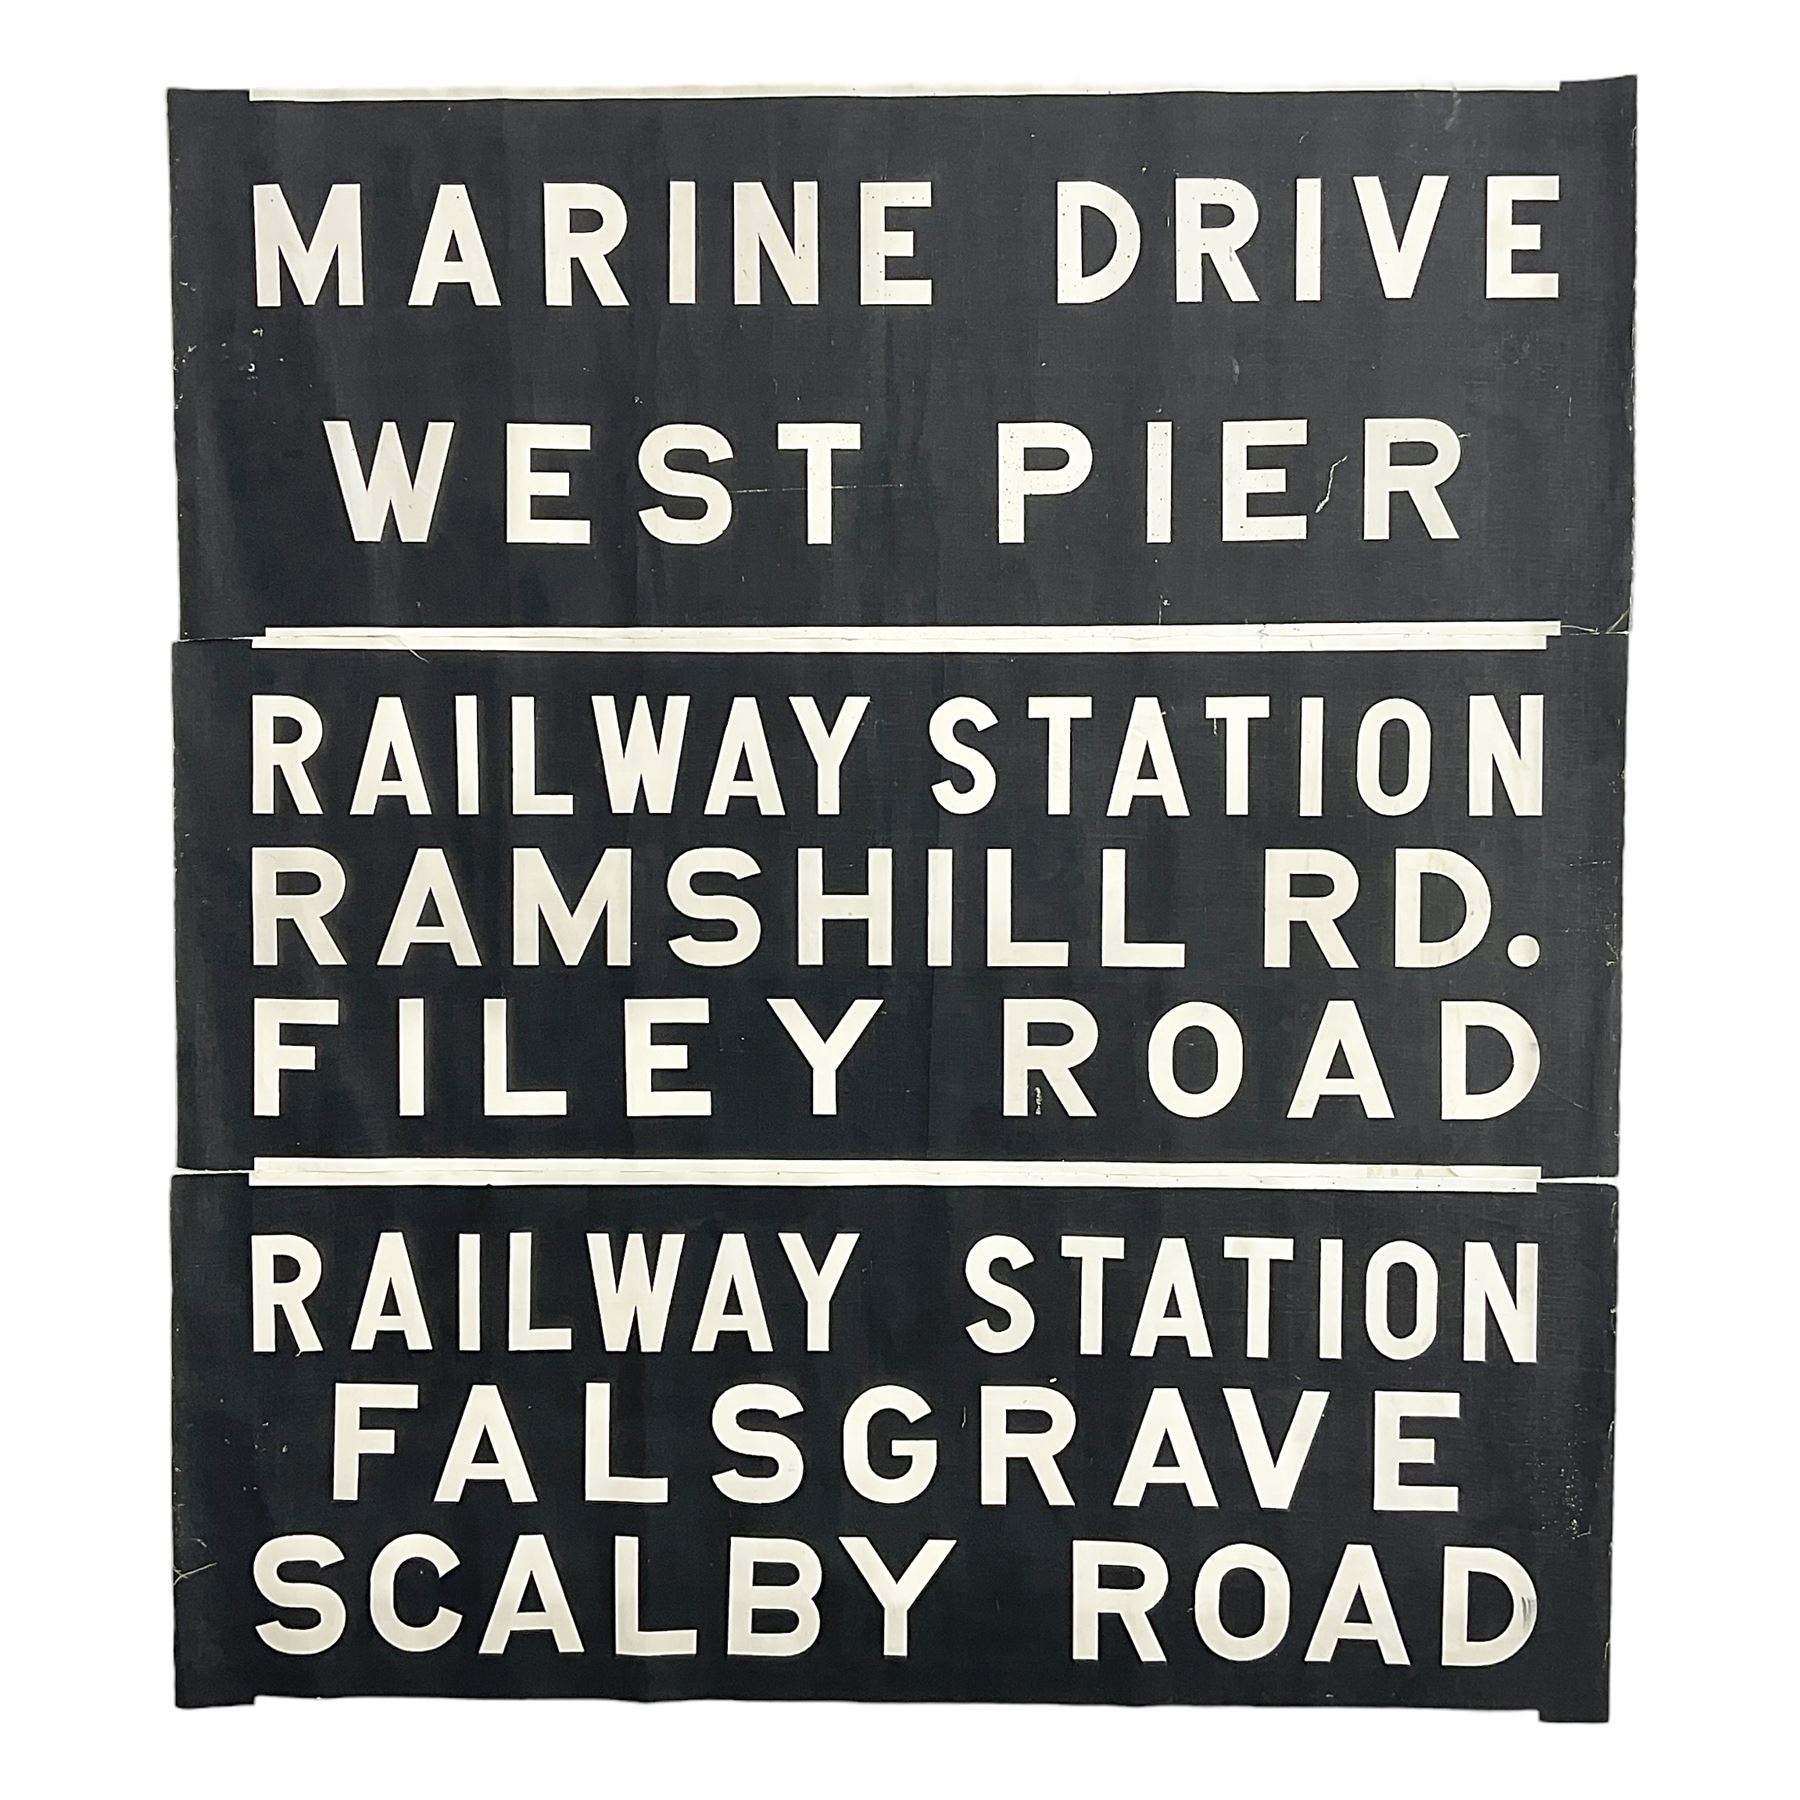 Three mid 20th century Scarborough bus destination blind sections